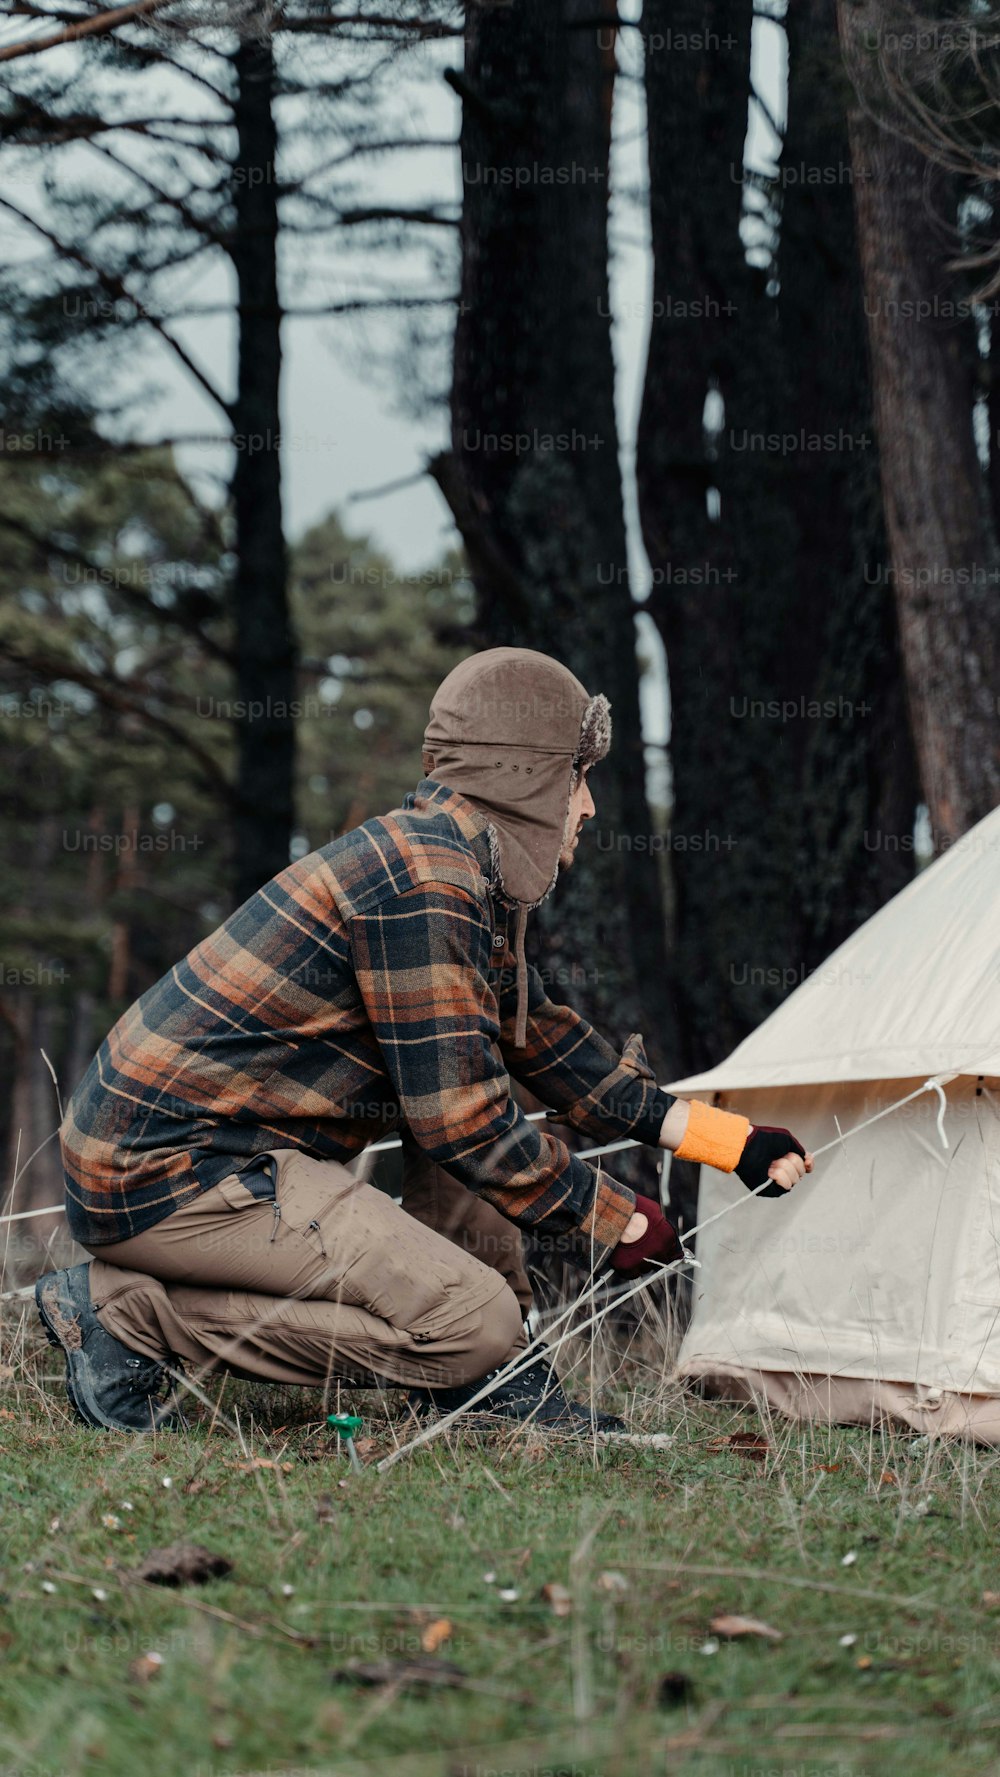 a man kneeling down next to a tent